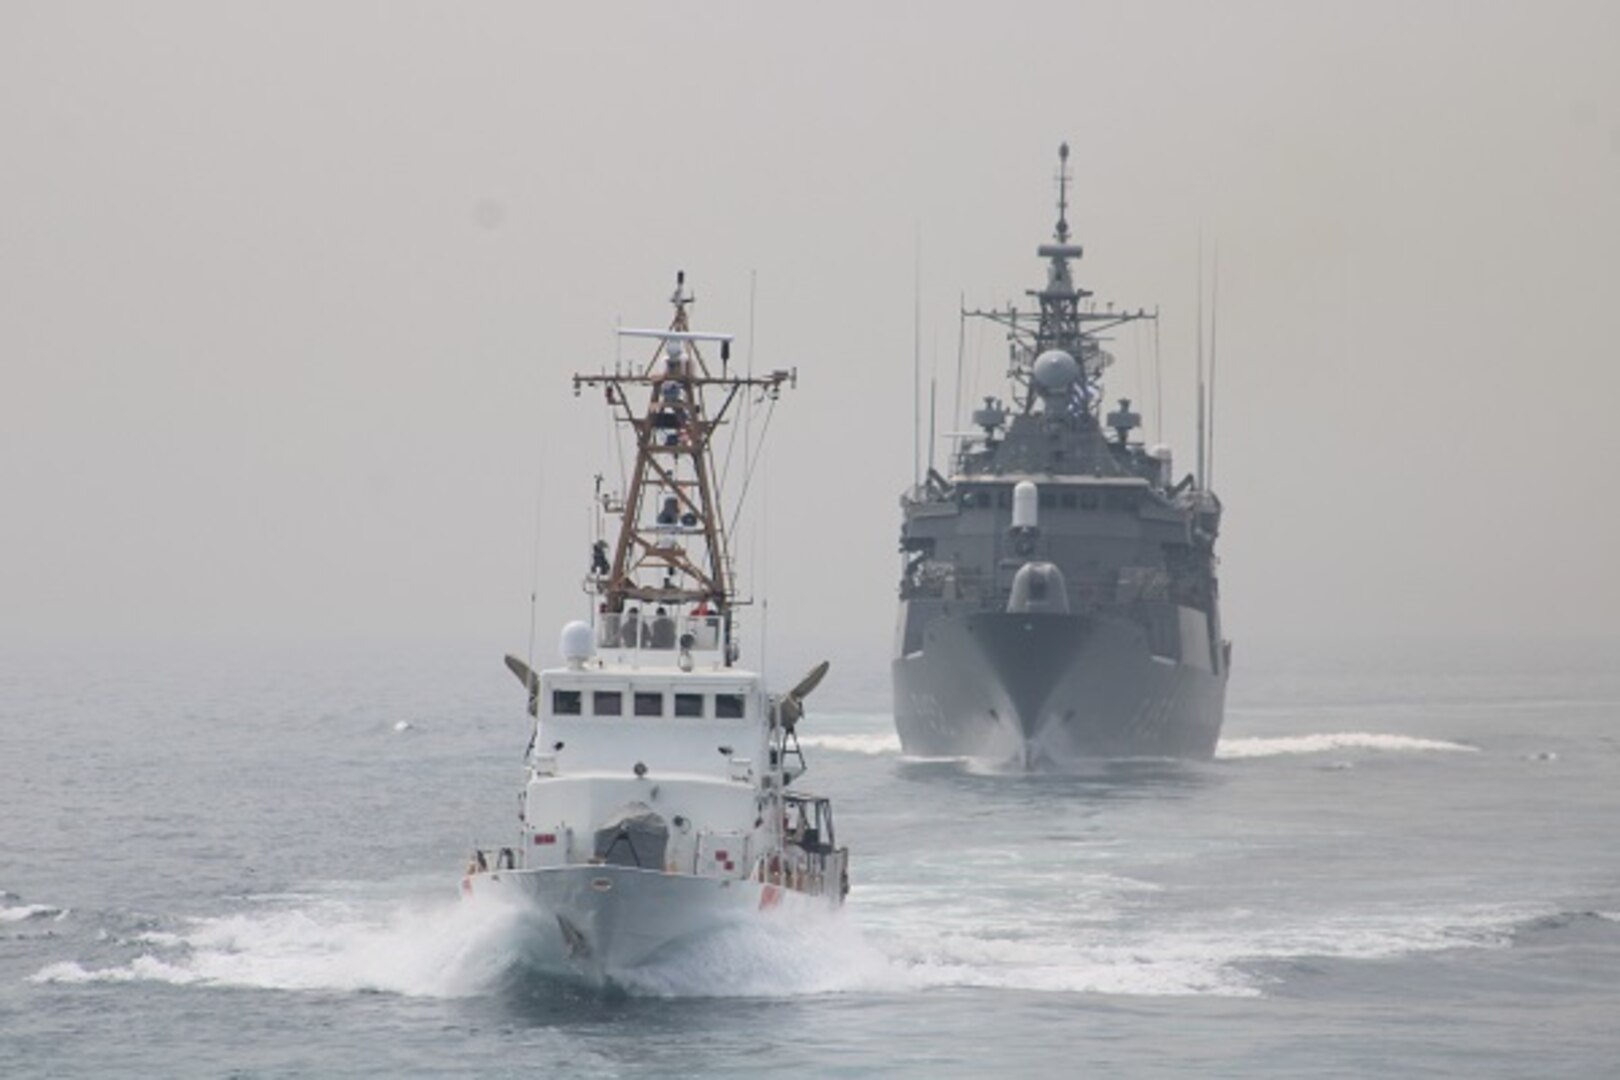 U.S. Coast Guard patrol boat USCGC Maui (WPB 1304) and Greek guided-missile frigate HS Hydra (F452) participate in a passing exercise in the Arabian Gulf, Feb. 25.  U.S. Coast Guard Patrol Forces Southwest Asia (PATFORSWA) is comprised of six 110' cutters, the Maritime Engagement Team, shore side support personnel, and is the Coast Guard's largest unit outside of the U.S. playing a key role in supporting Navy security cooperation, maritime security, and maritime infrastructure protection operations in the U.S. 5th Fleet area of operations.